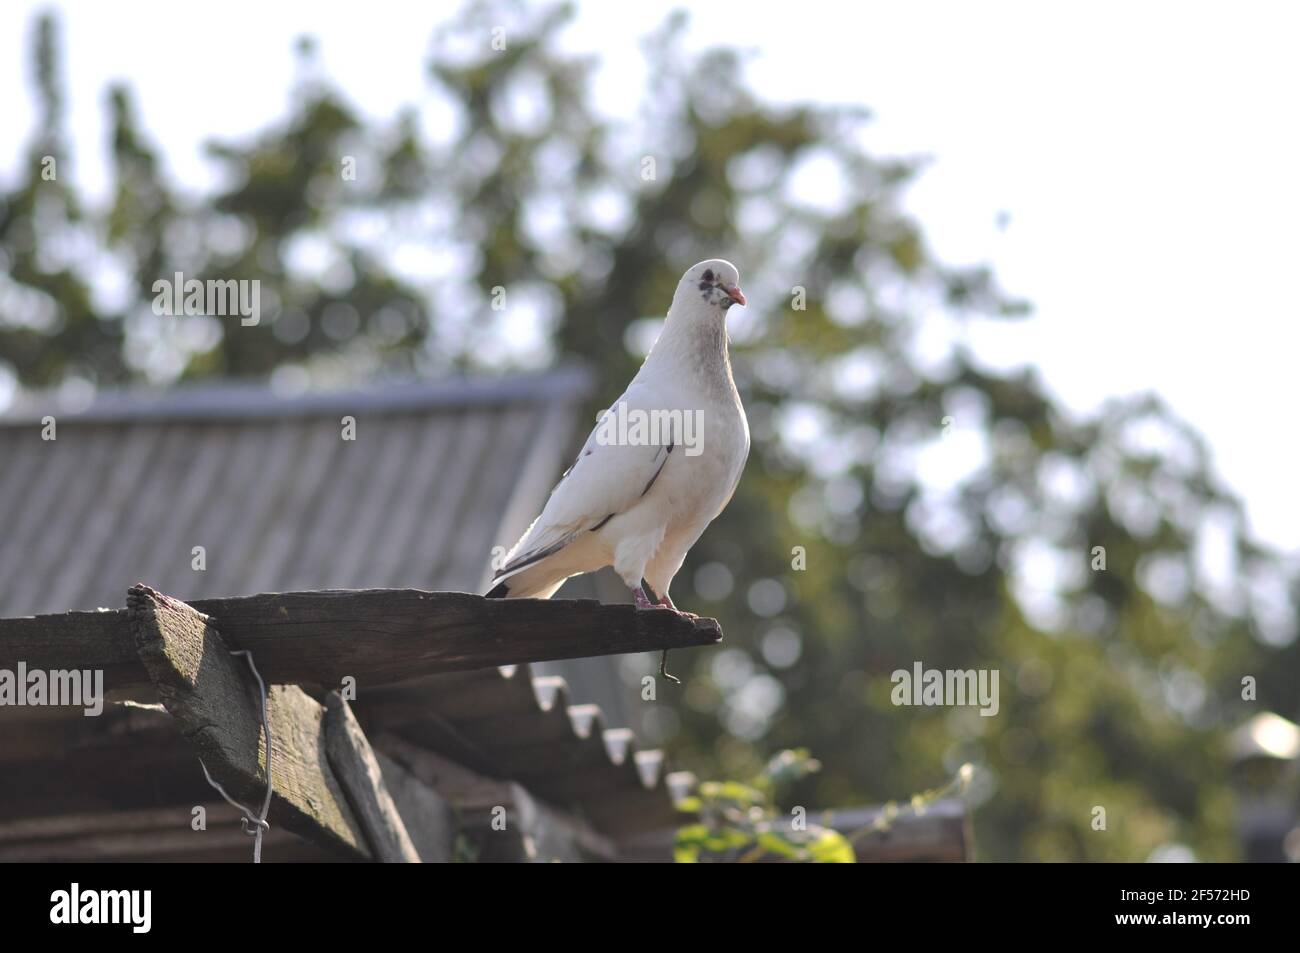 a white pigeon sits on a wooden plank above the ground. Stock Photo